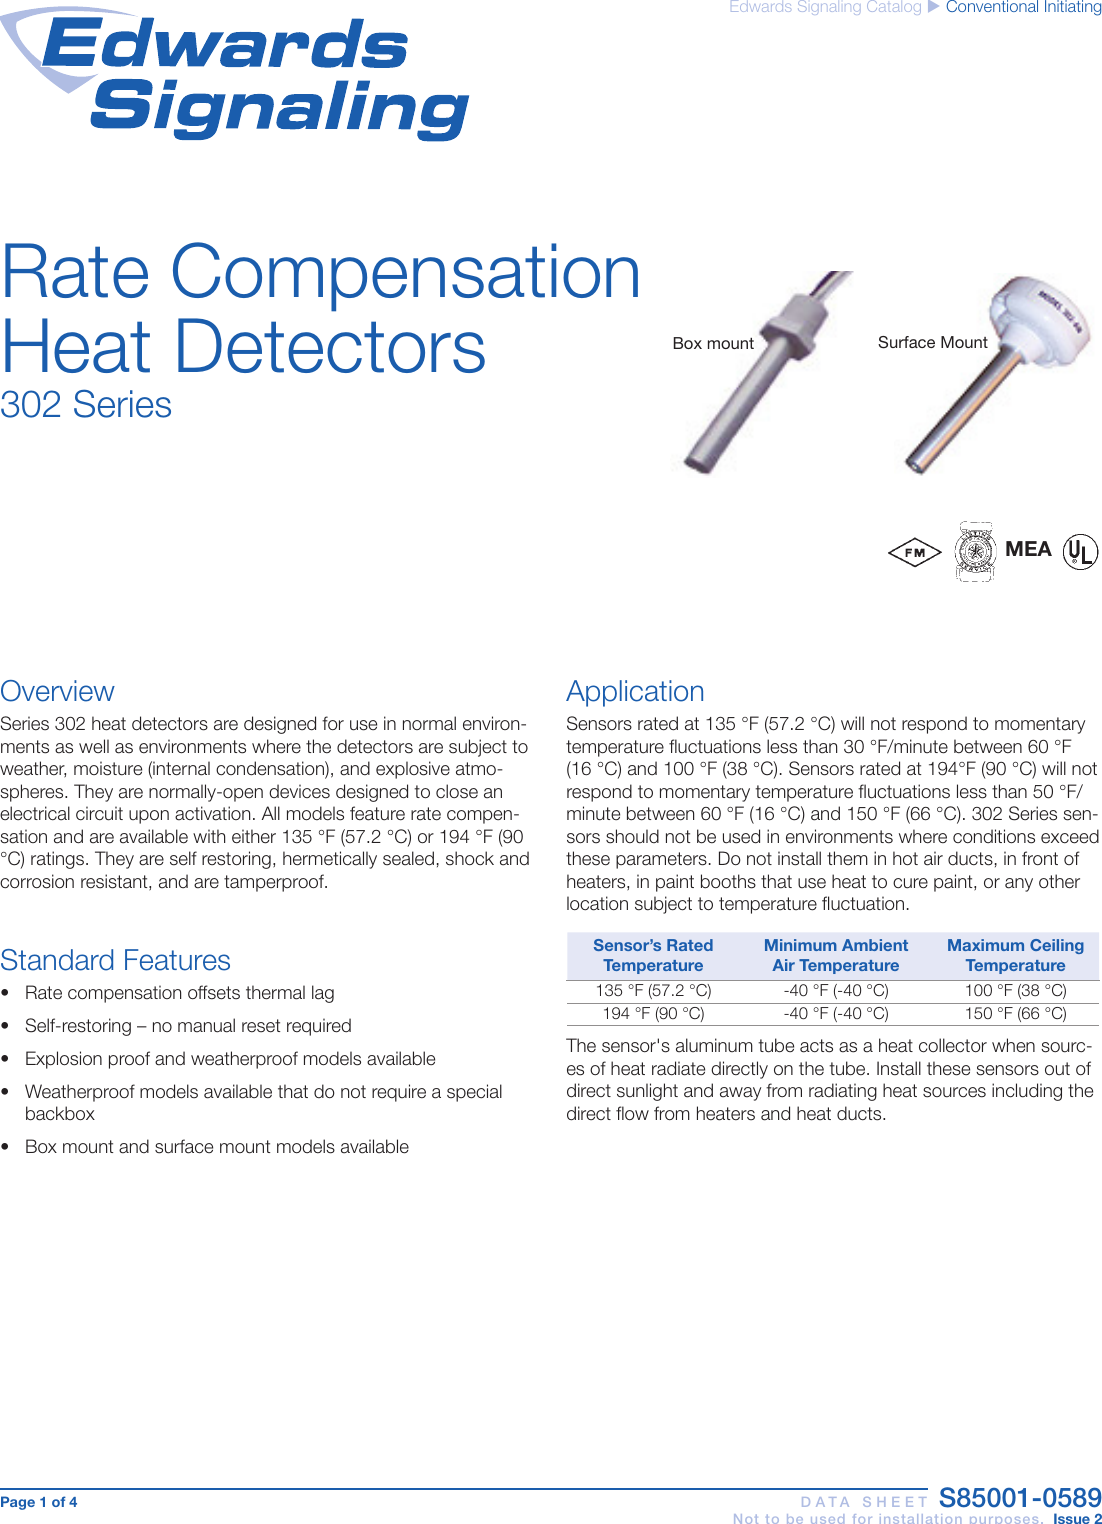 Page 1 of 4 - Data Sheet S85001-0589 -- Rate Compensation Heat Detectors  Brochure